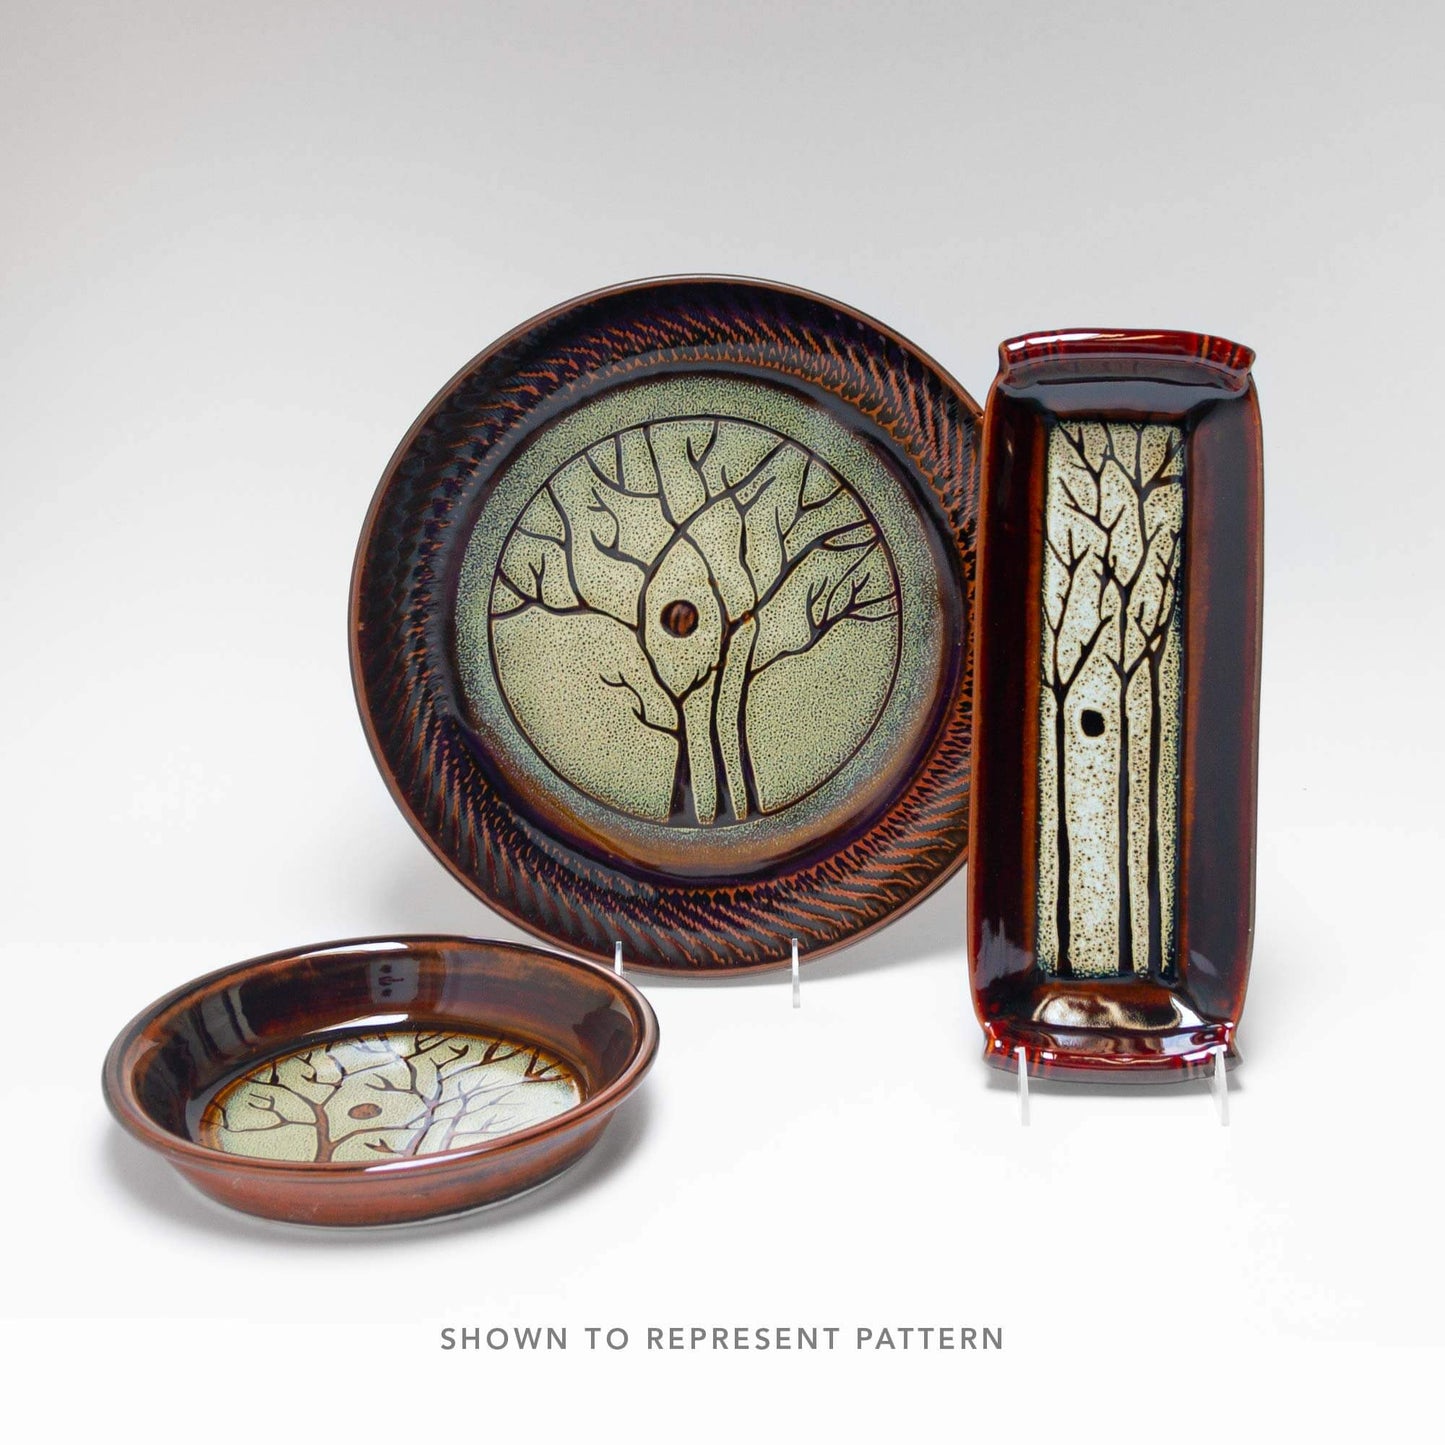 Handmade Pottery Pie Plate in Hamada Tree pattern made by Georgetown Pottery in Maine